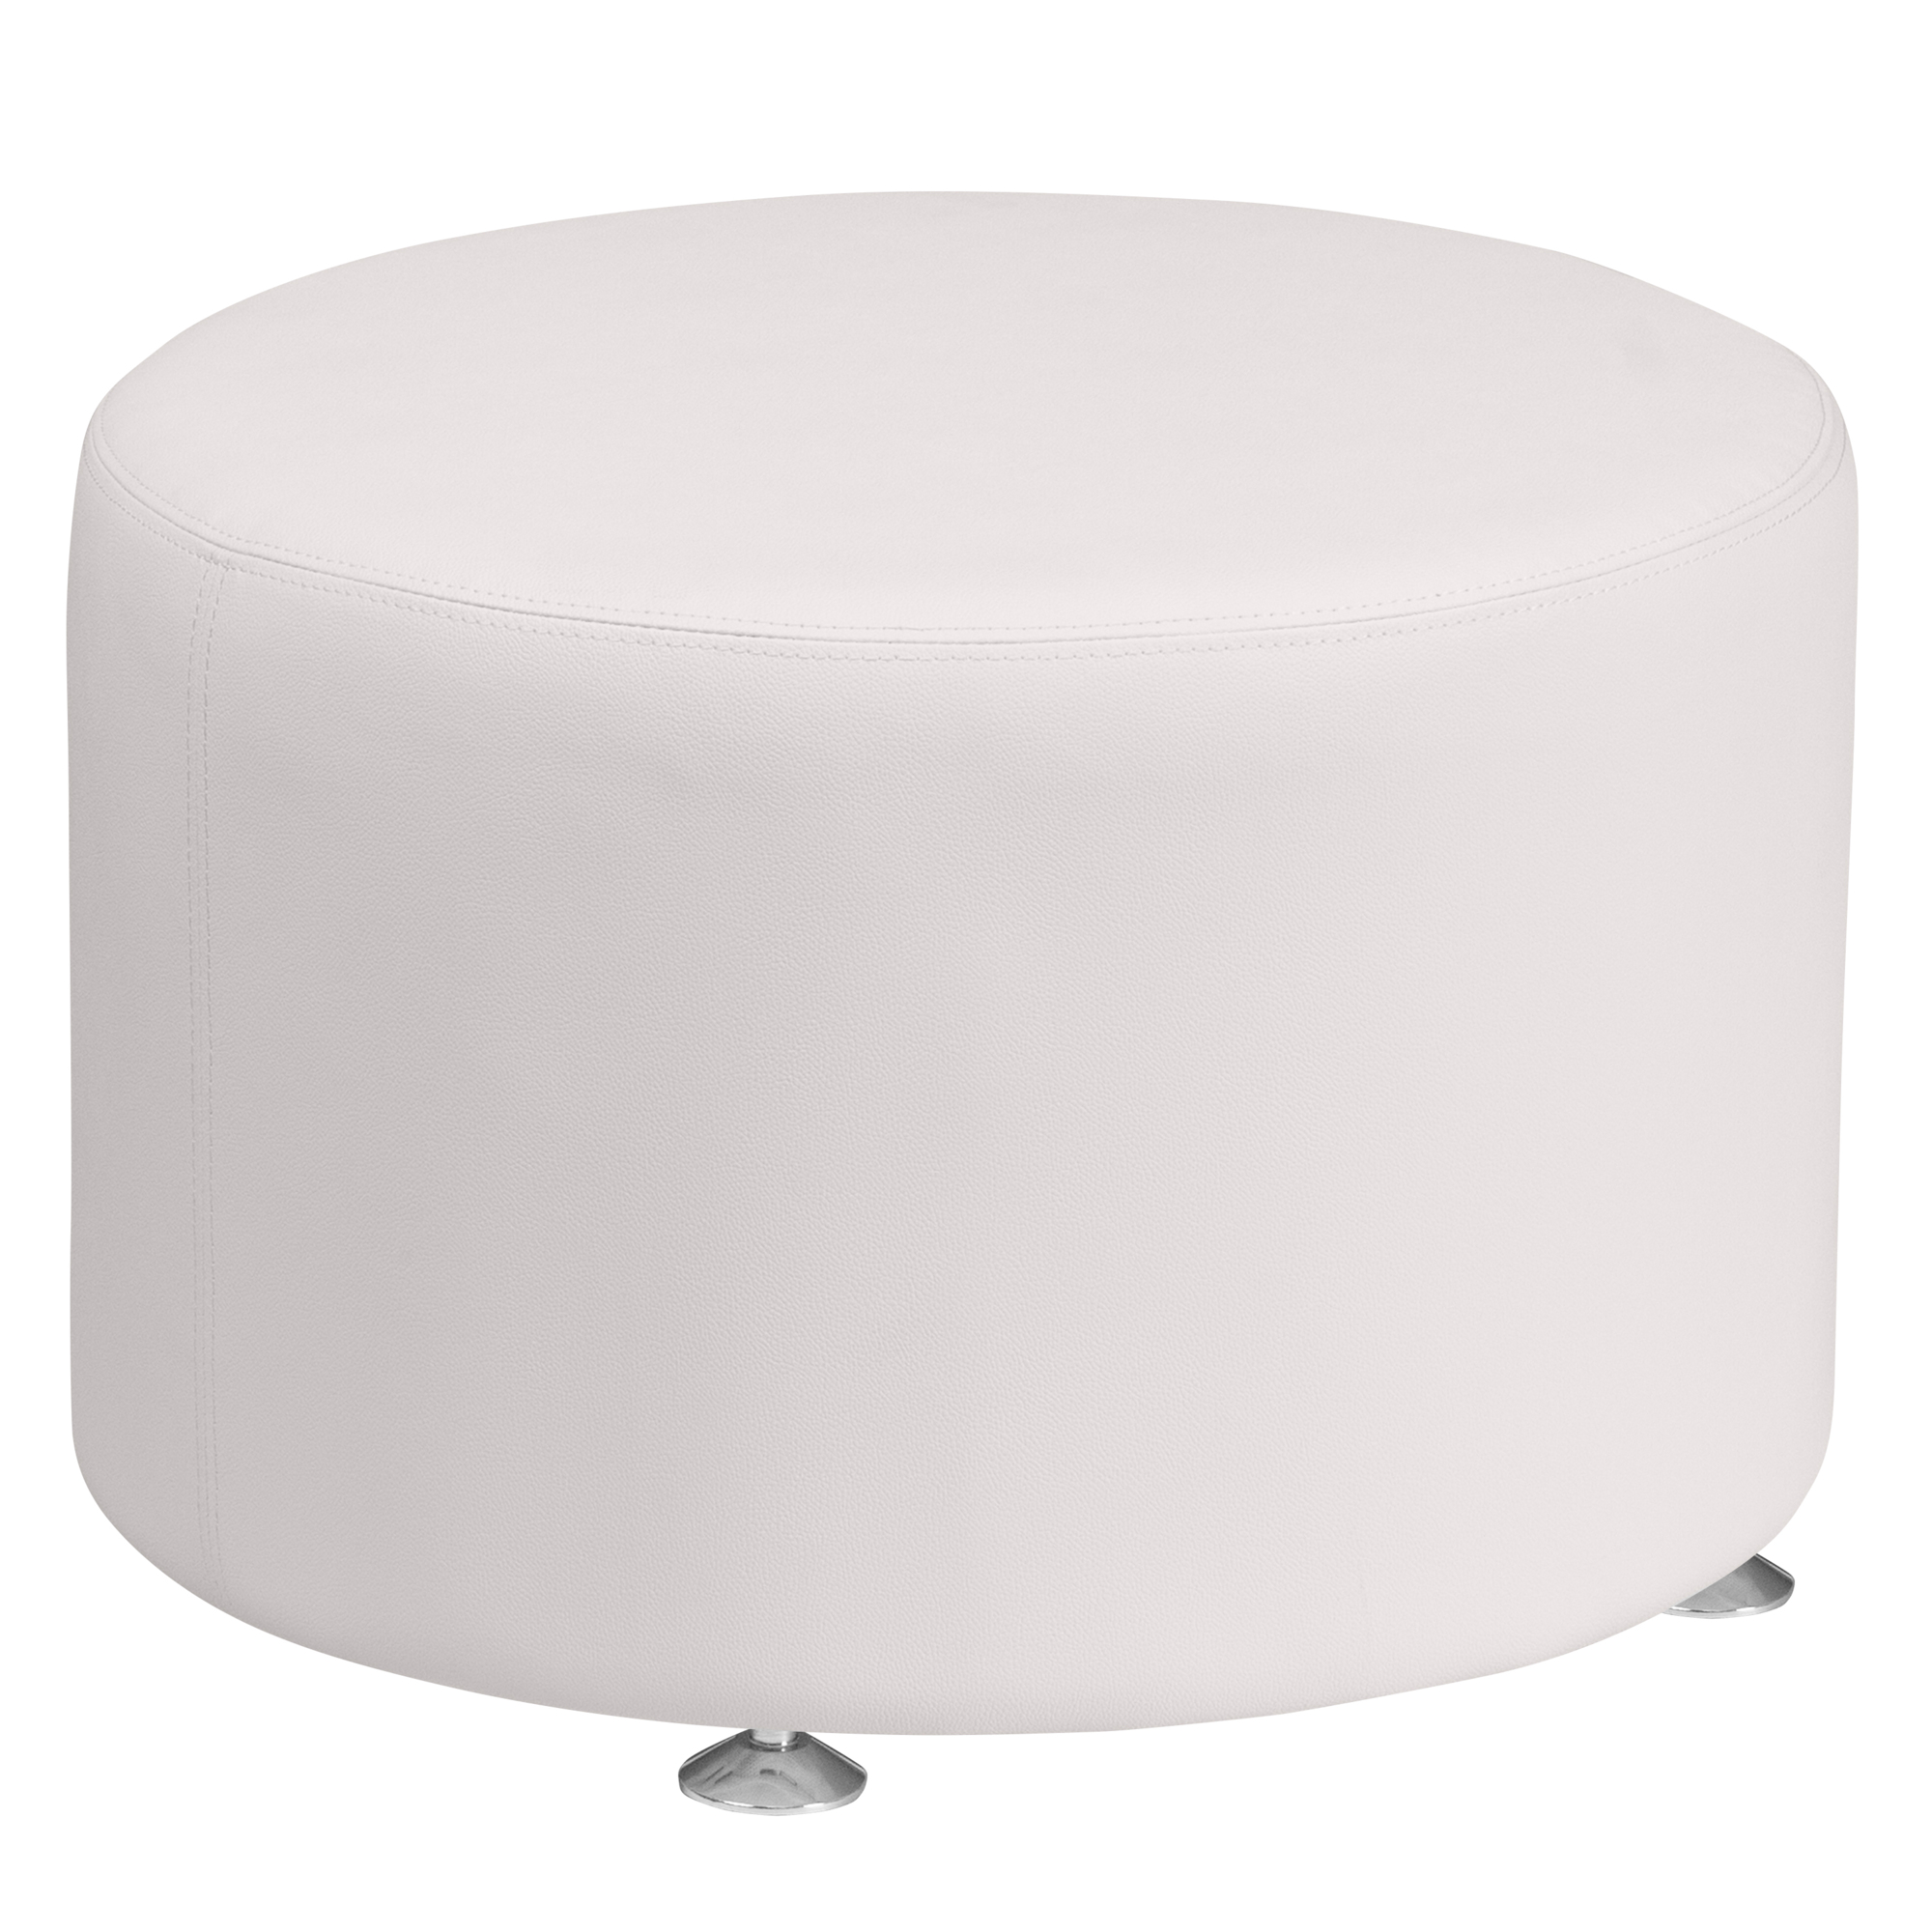 Flash Furniture, White LeatherSoft 24Inch Round Ottoman, Primary Color White, Included (qty.) 1, Model ZB803RD24WH